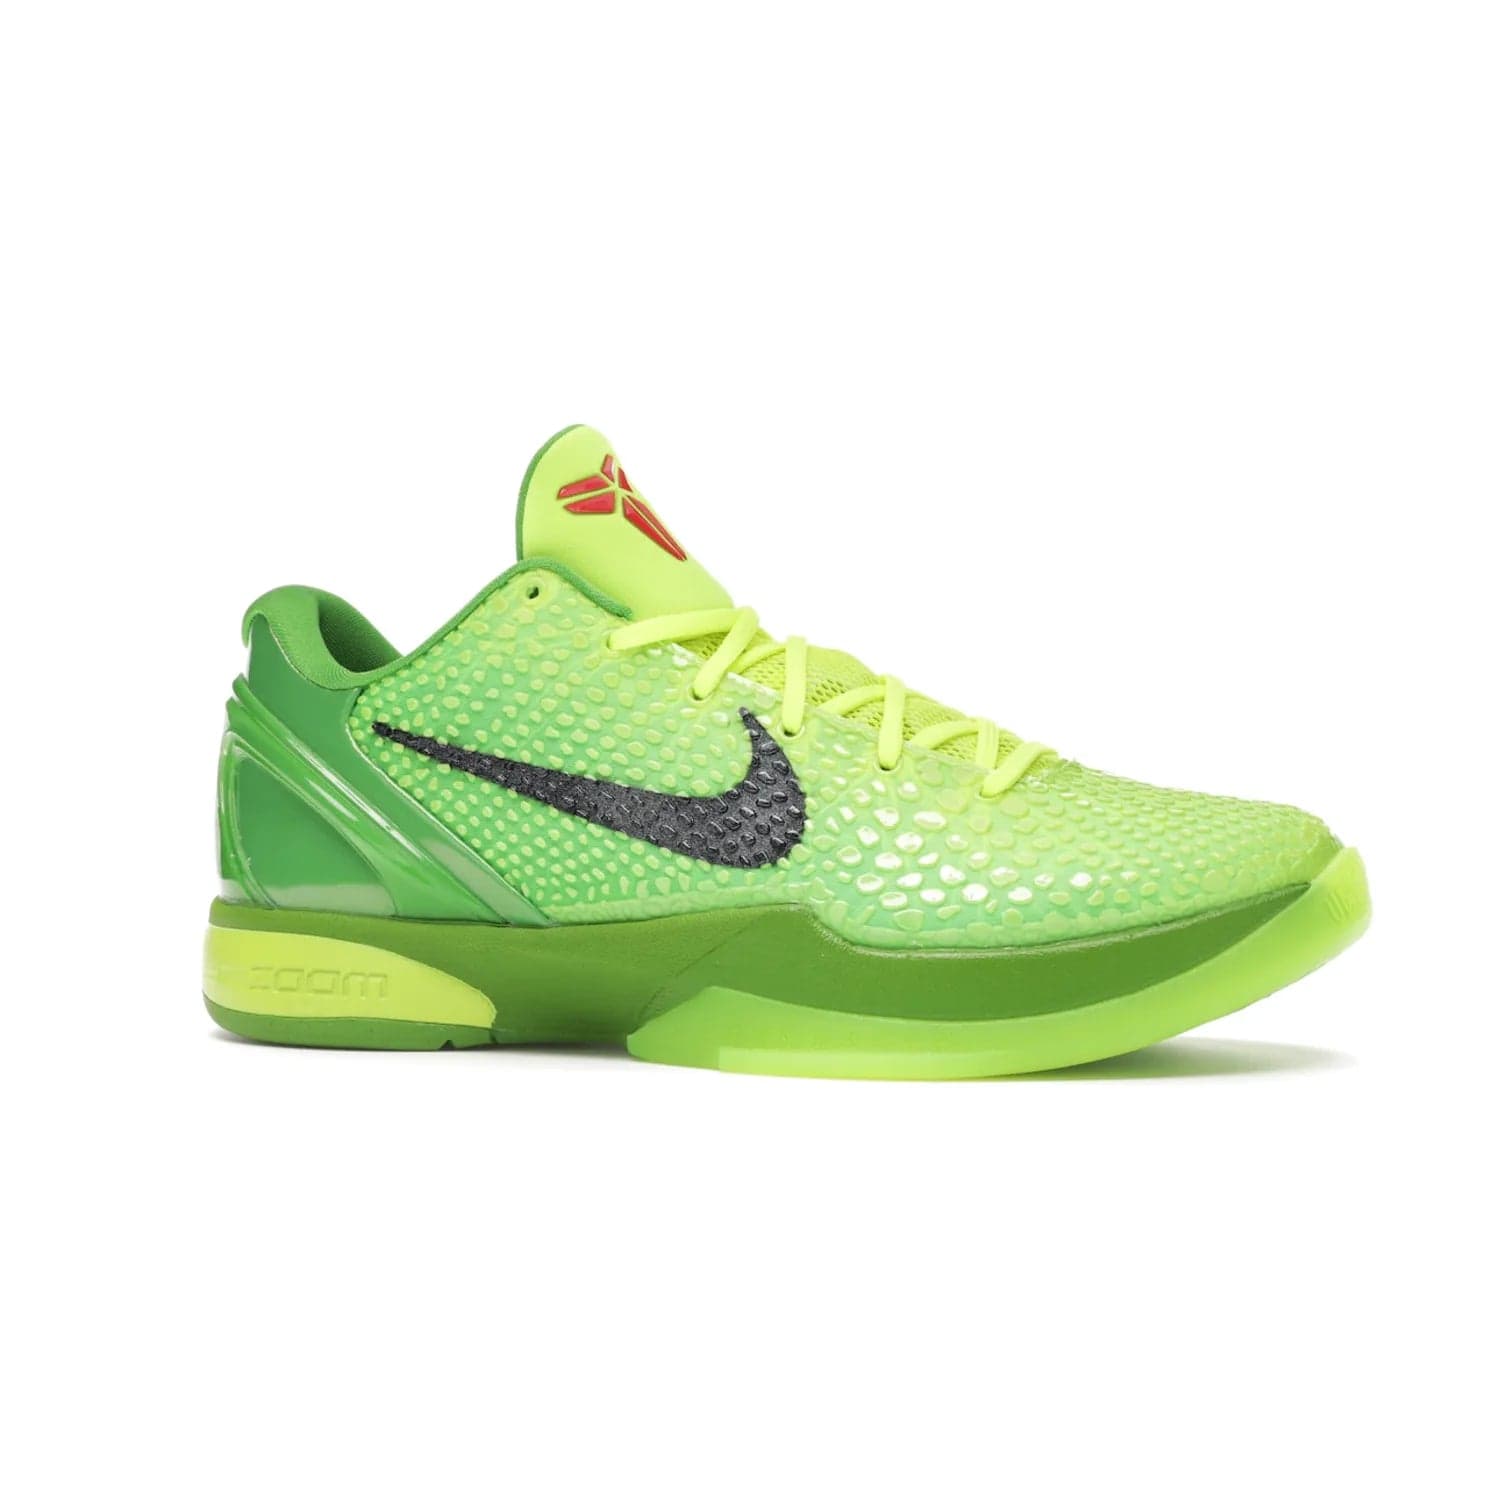 Nike Kobe 6 Protro Grinch (2020) - Image 3 - Only at www.BallersClubKickz.com - #
The Nike Kobe 6 Protro Grinch updates the iconic 2011 design with modern tech like a Zoom Air cushioning system, scaled-down traction, and updated silhouette. Experience the textured Green Apple and Volt upper plus bright red and green accents for $180.